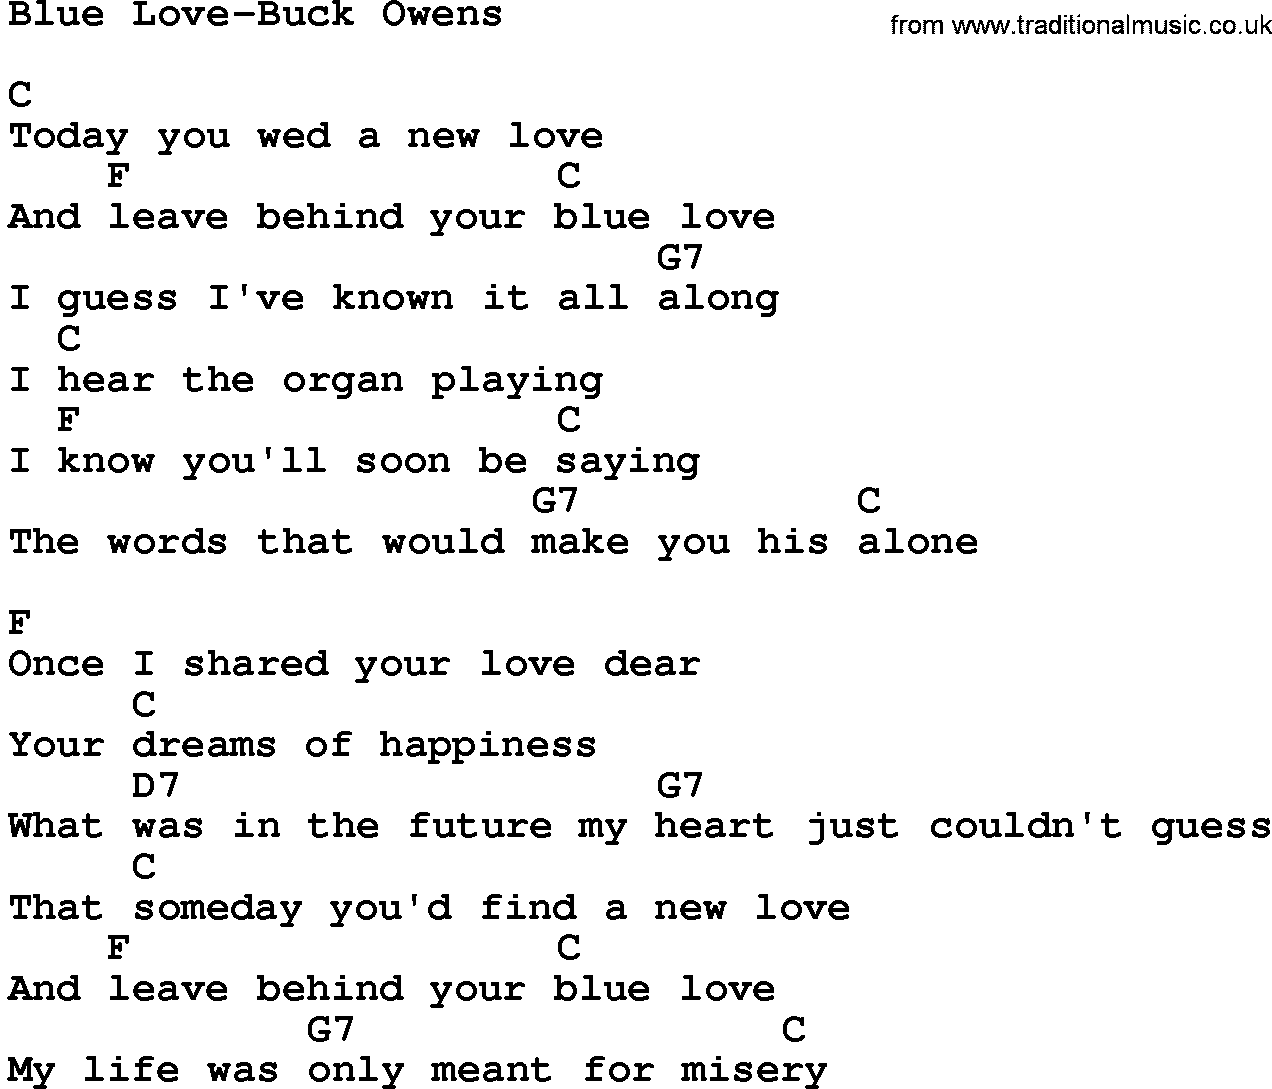 Country music song: Blue Love-Buck Owens lyrics and chords